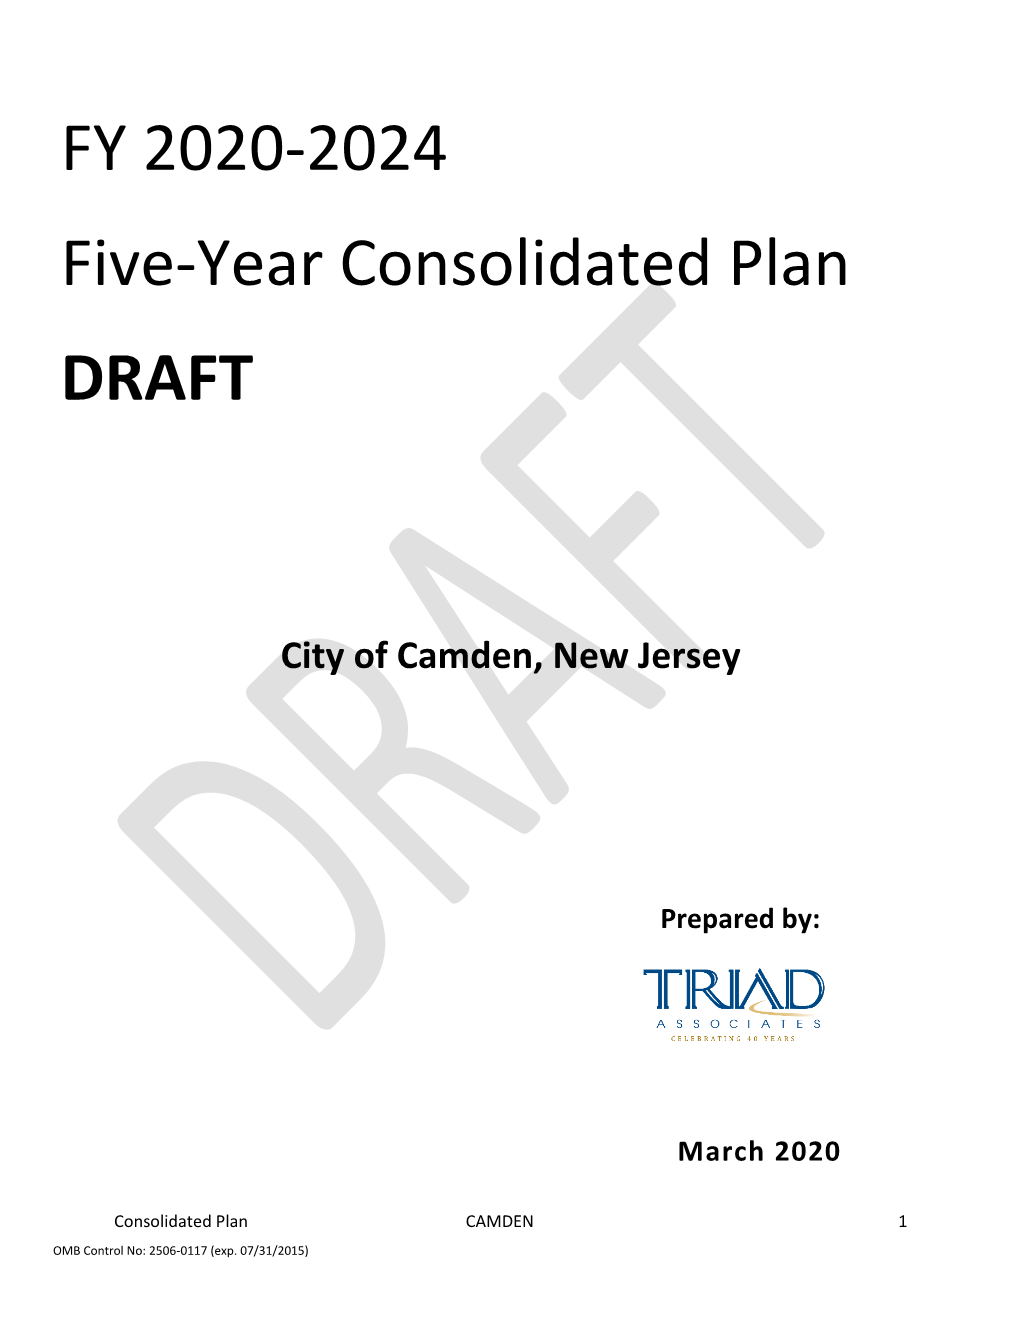 FY 2020-2024 Five-Year Consolidated Plan DRAFT